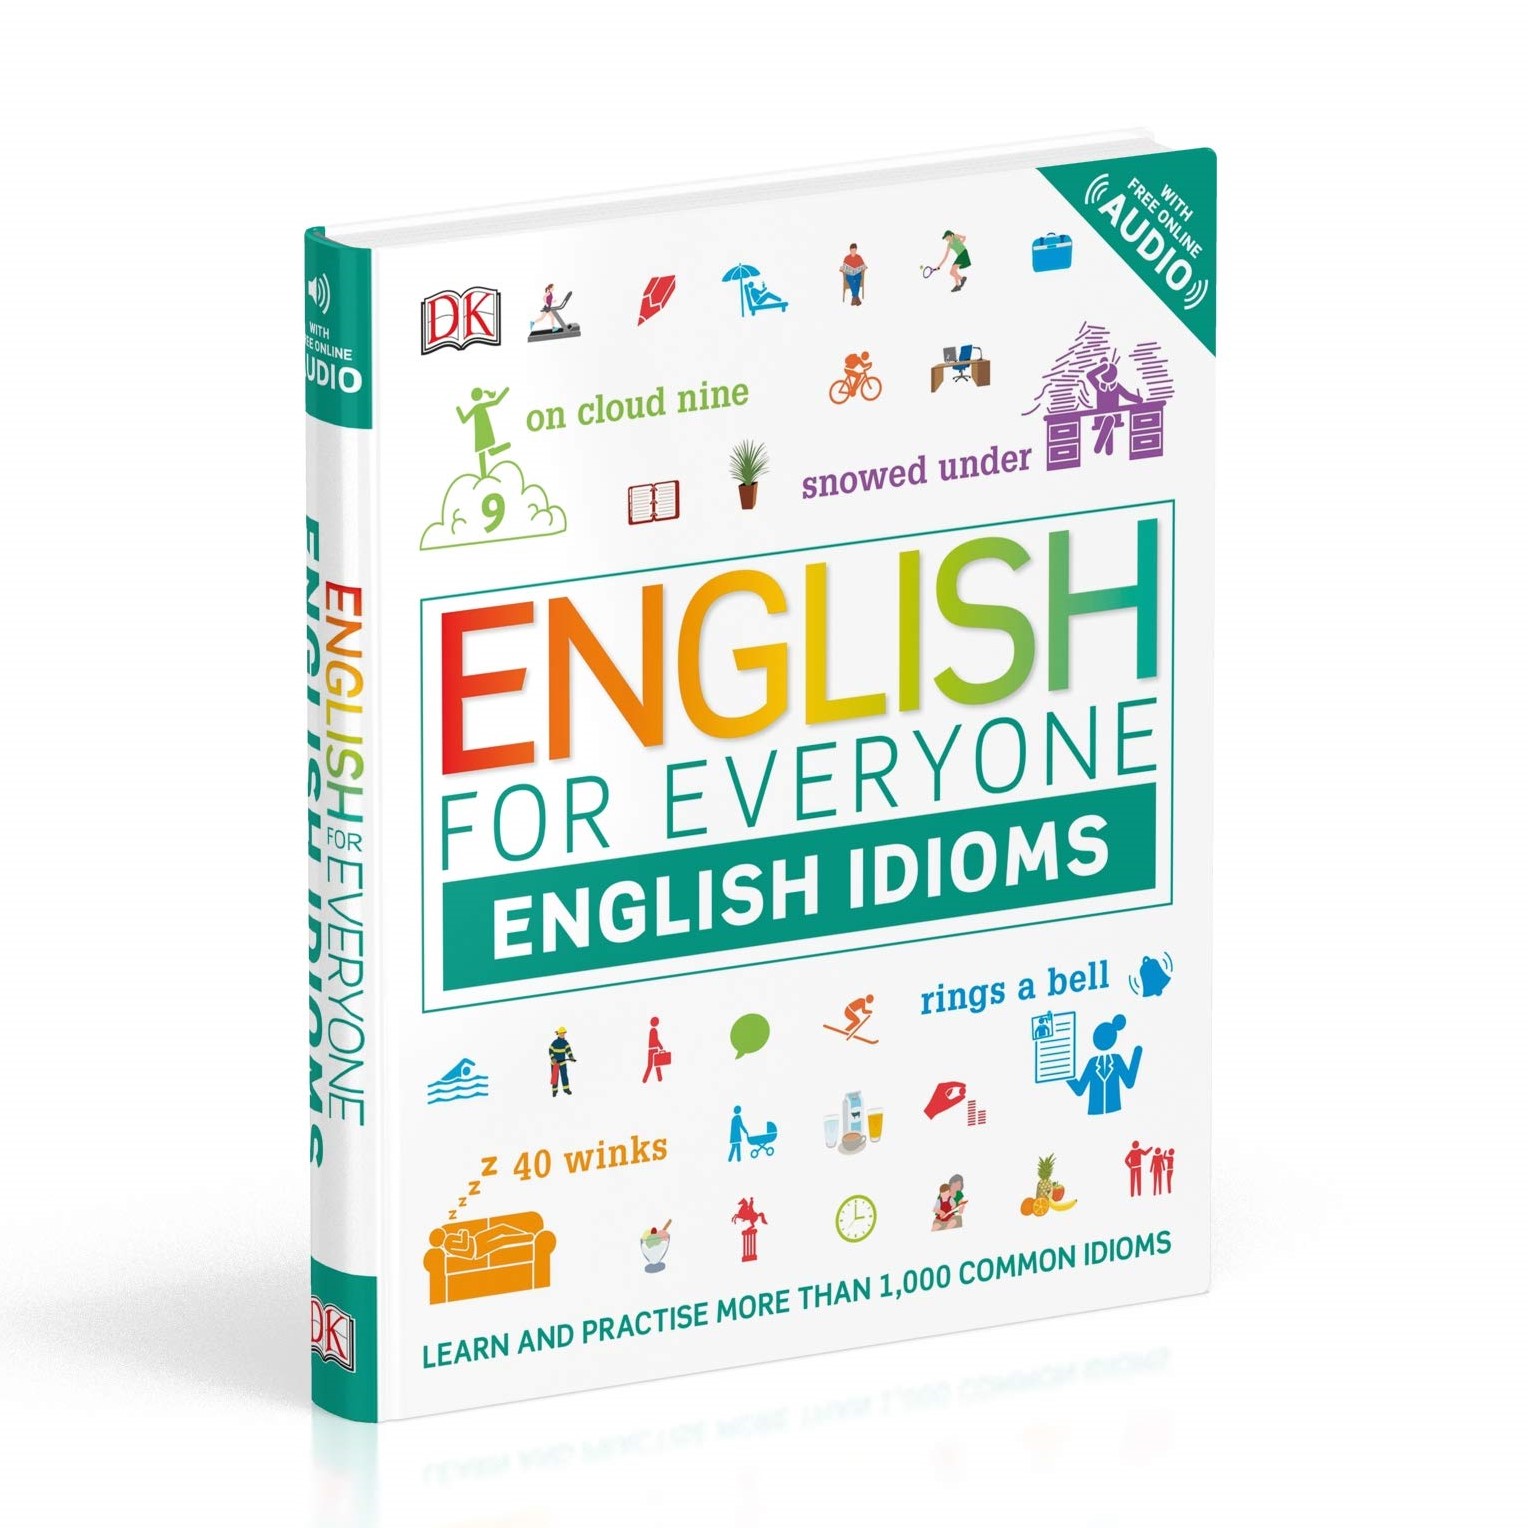 DK人人学英语：习语自学指南 英文原版 English for Everyone English Idioms: Learn and practise common idioms & expressions